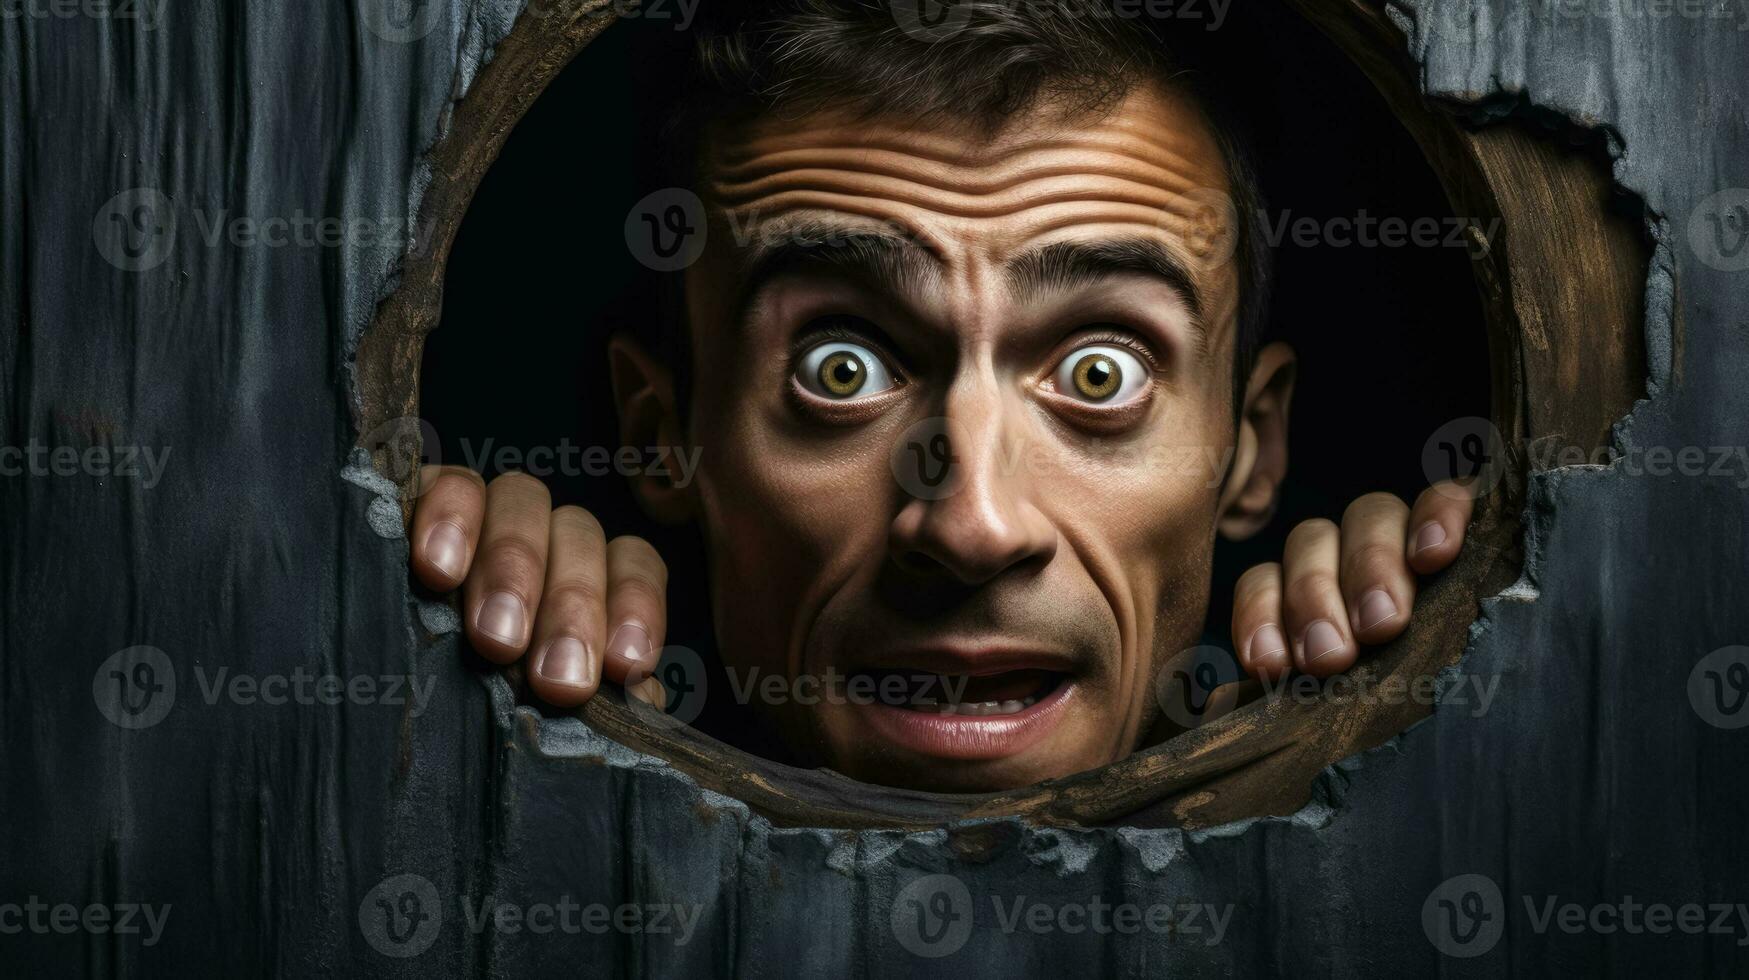 Being trapped in a confined space confused face on dark background with a place for text photo